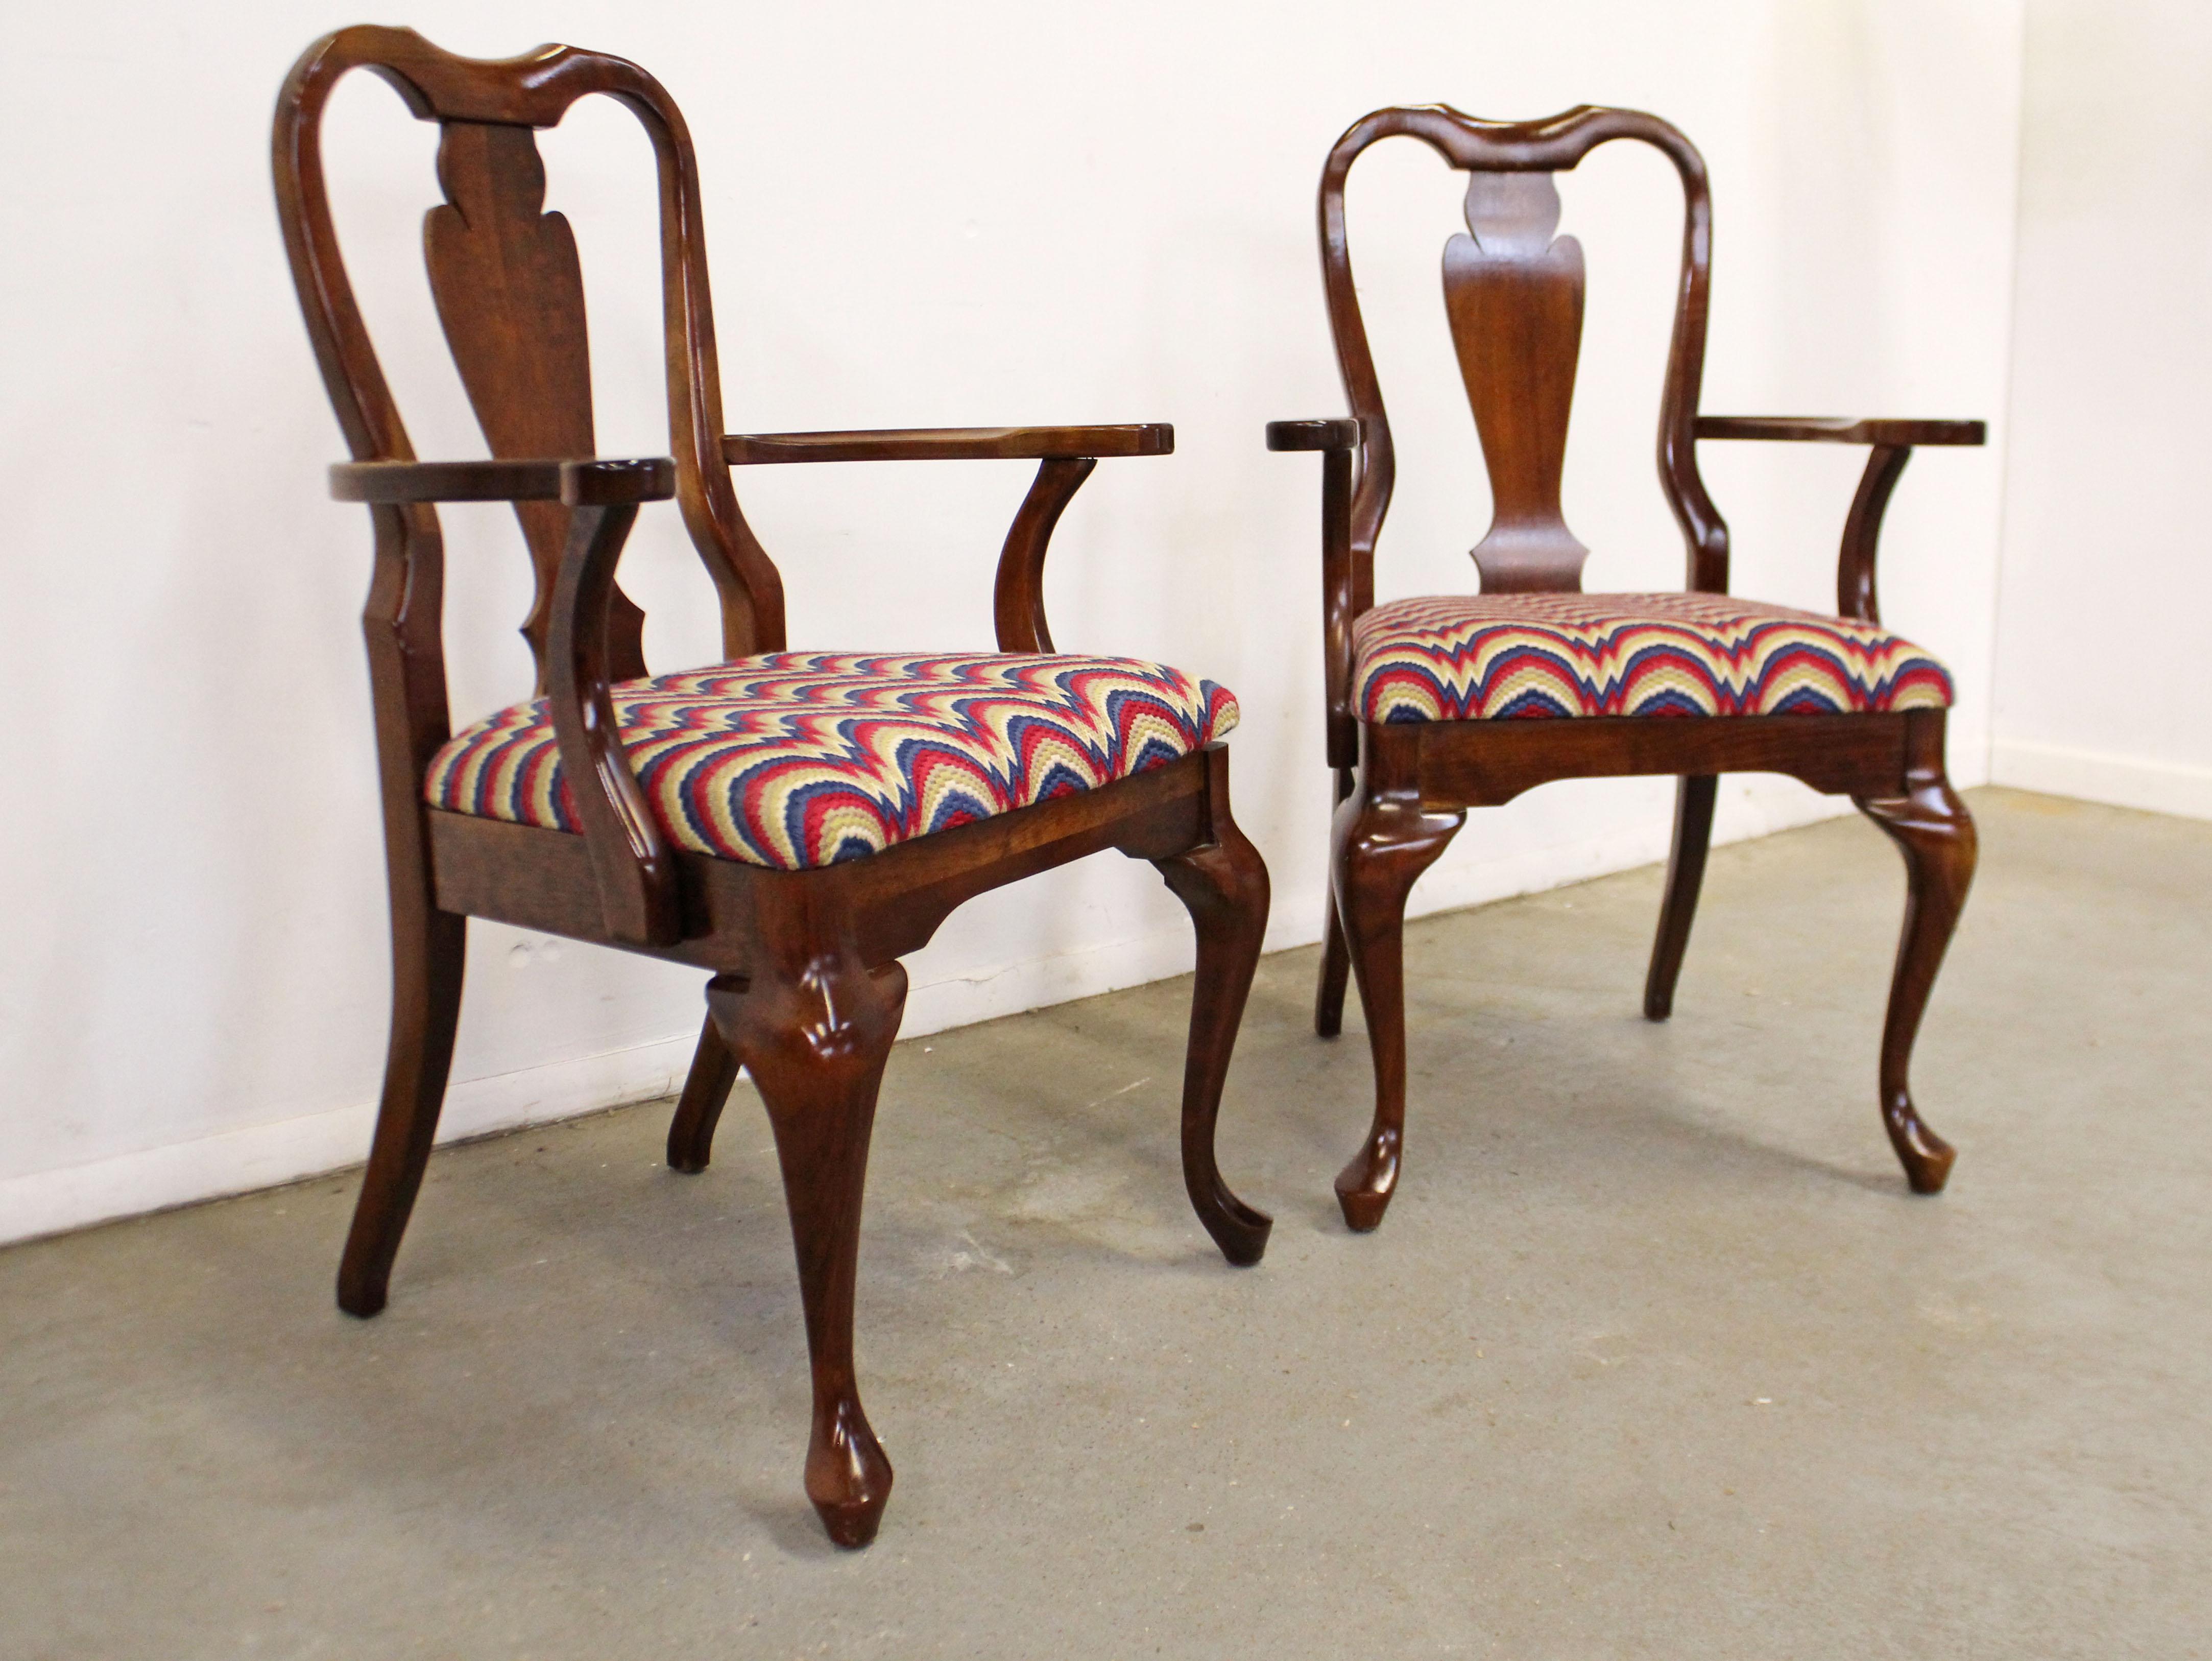 Offered is a pair of vintage Queen Anne armchairs. They are made of solid cherry wood and have knit upholstered seats. In very good condition for their age, with some slight surface scratches/wear on the wood. The upholstery is in good condition, no